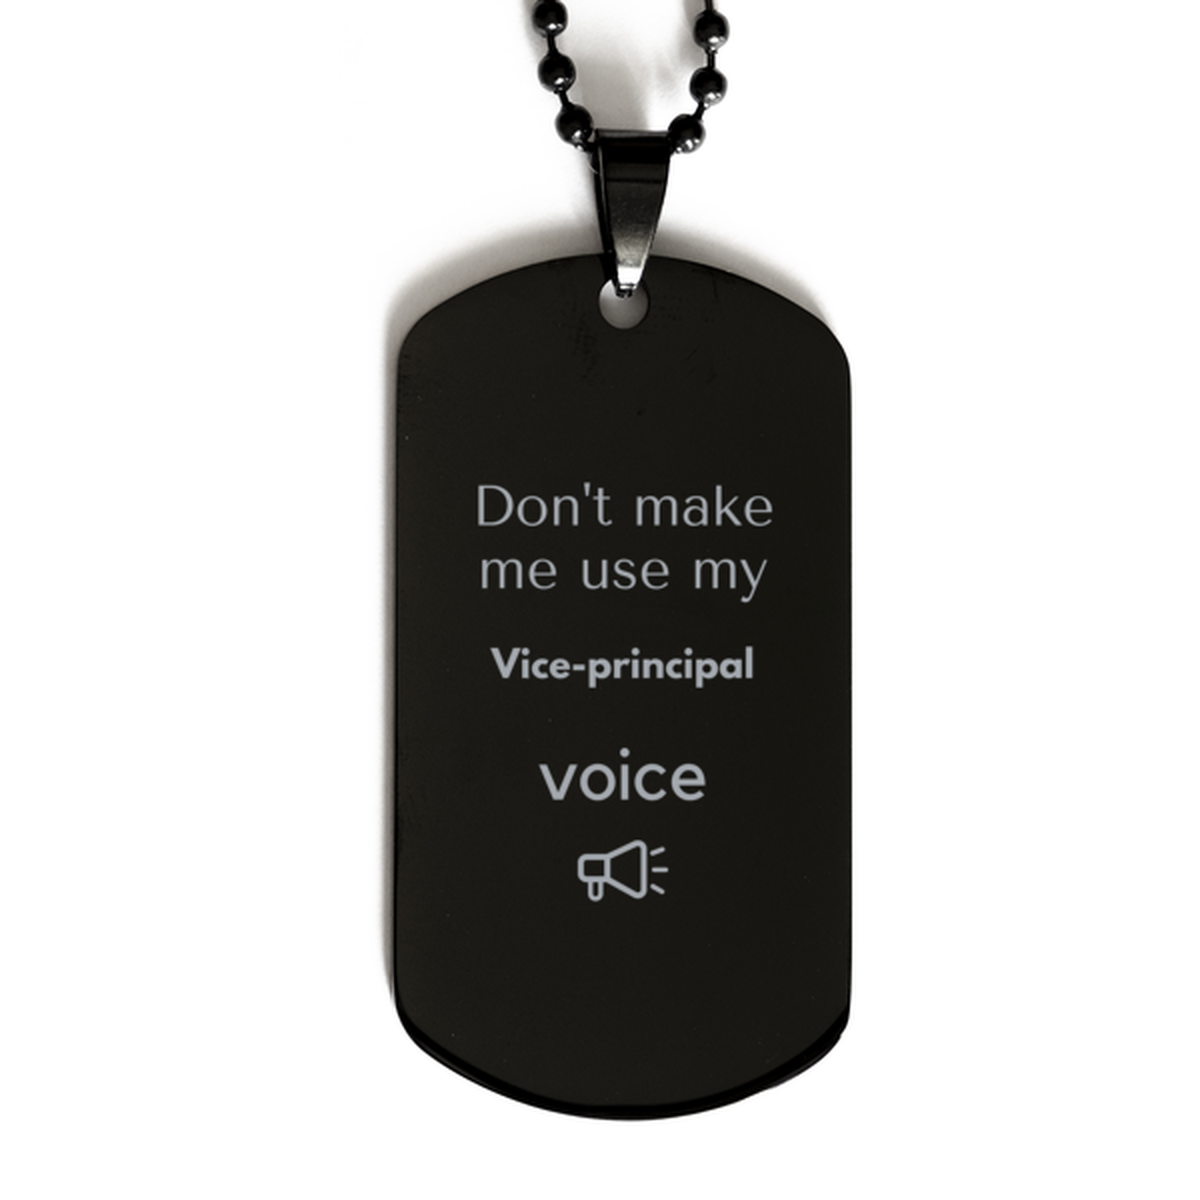 Don't make me use my Vice-principal voice, Sarcasm Vice-principal Gifts, Christmas Vice-principal Black Dog Tag Birthday Unique Gifts For Vice-principal Coworkers, Men, Women, Colleague, Friends